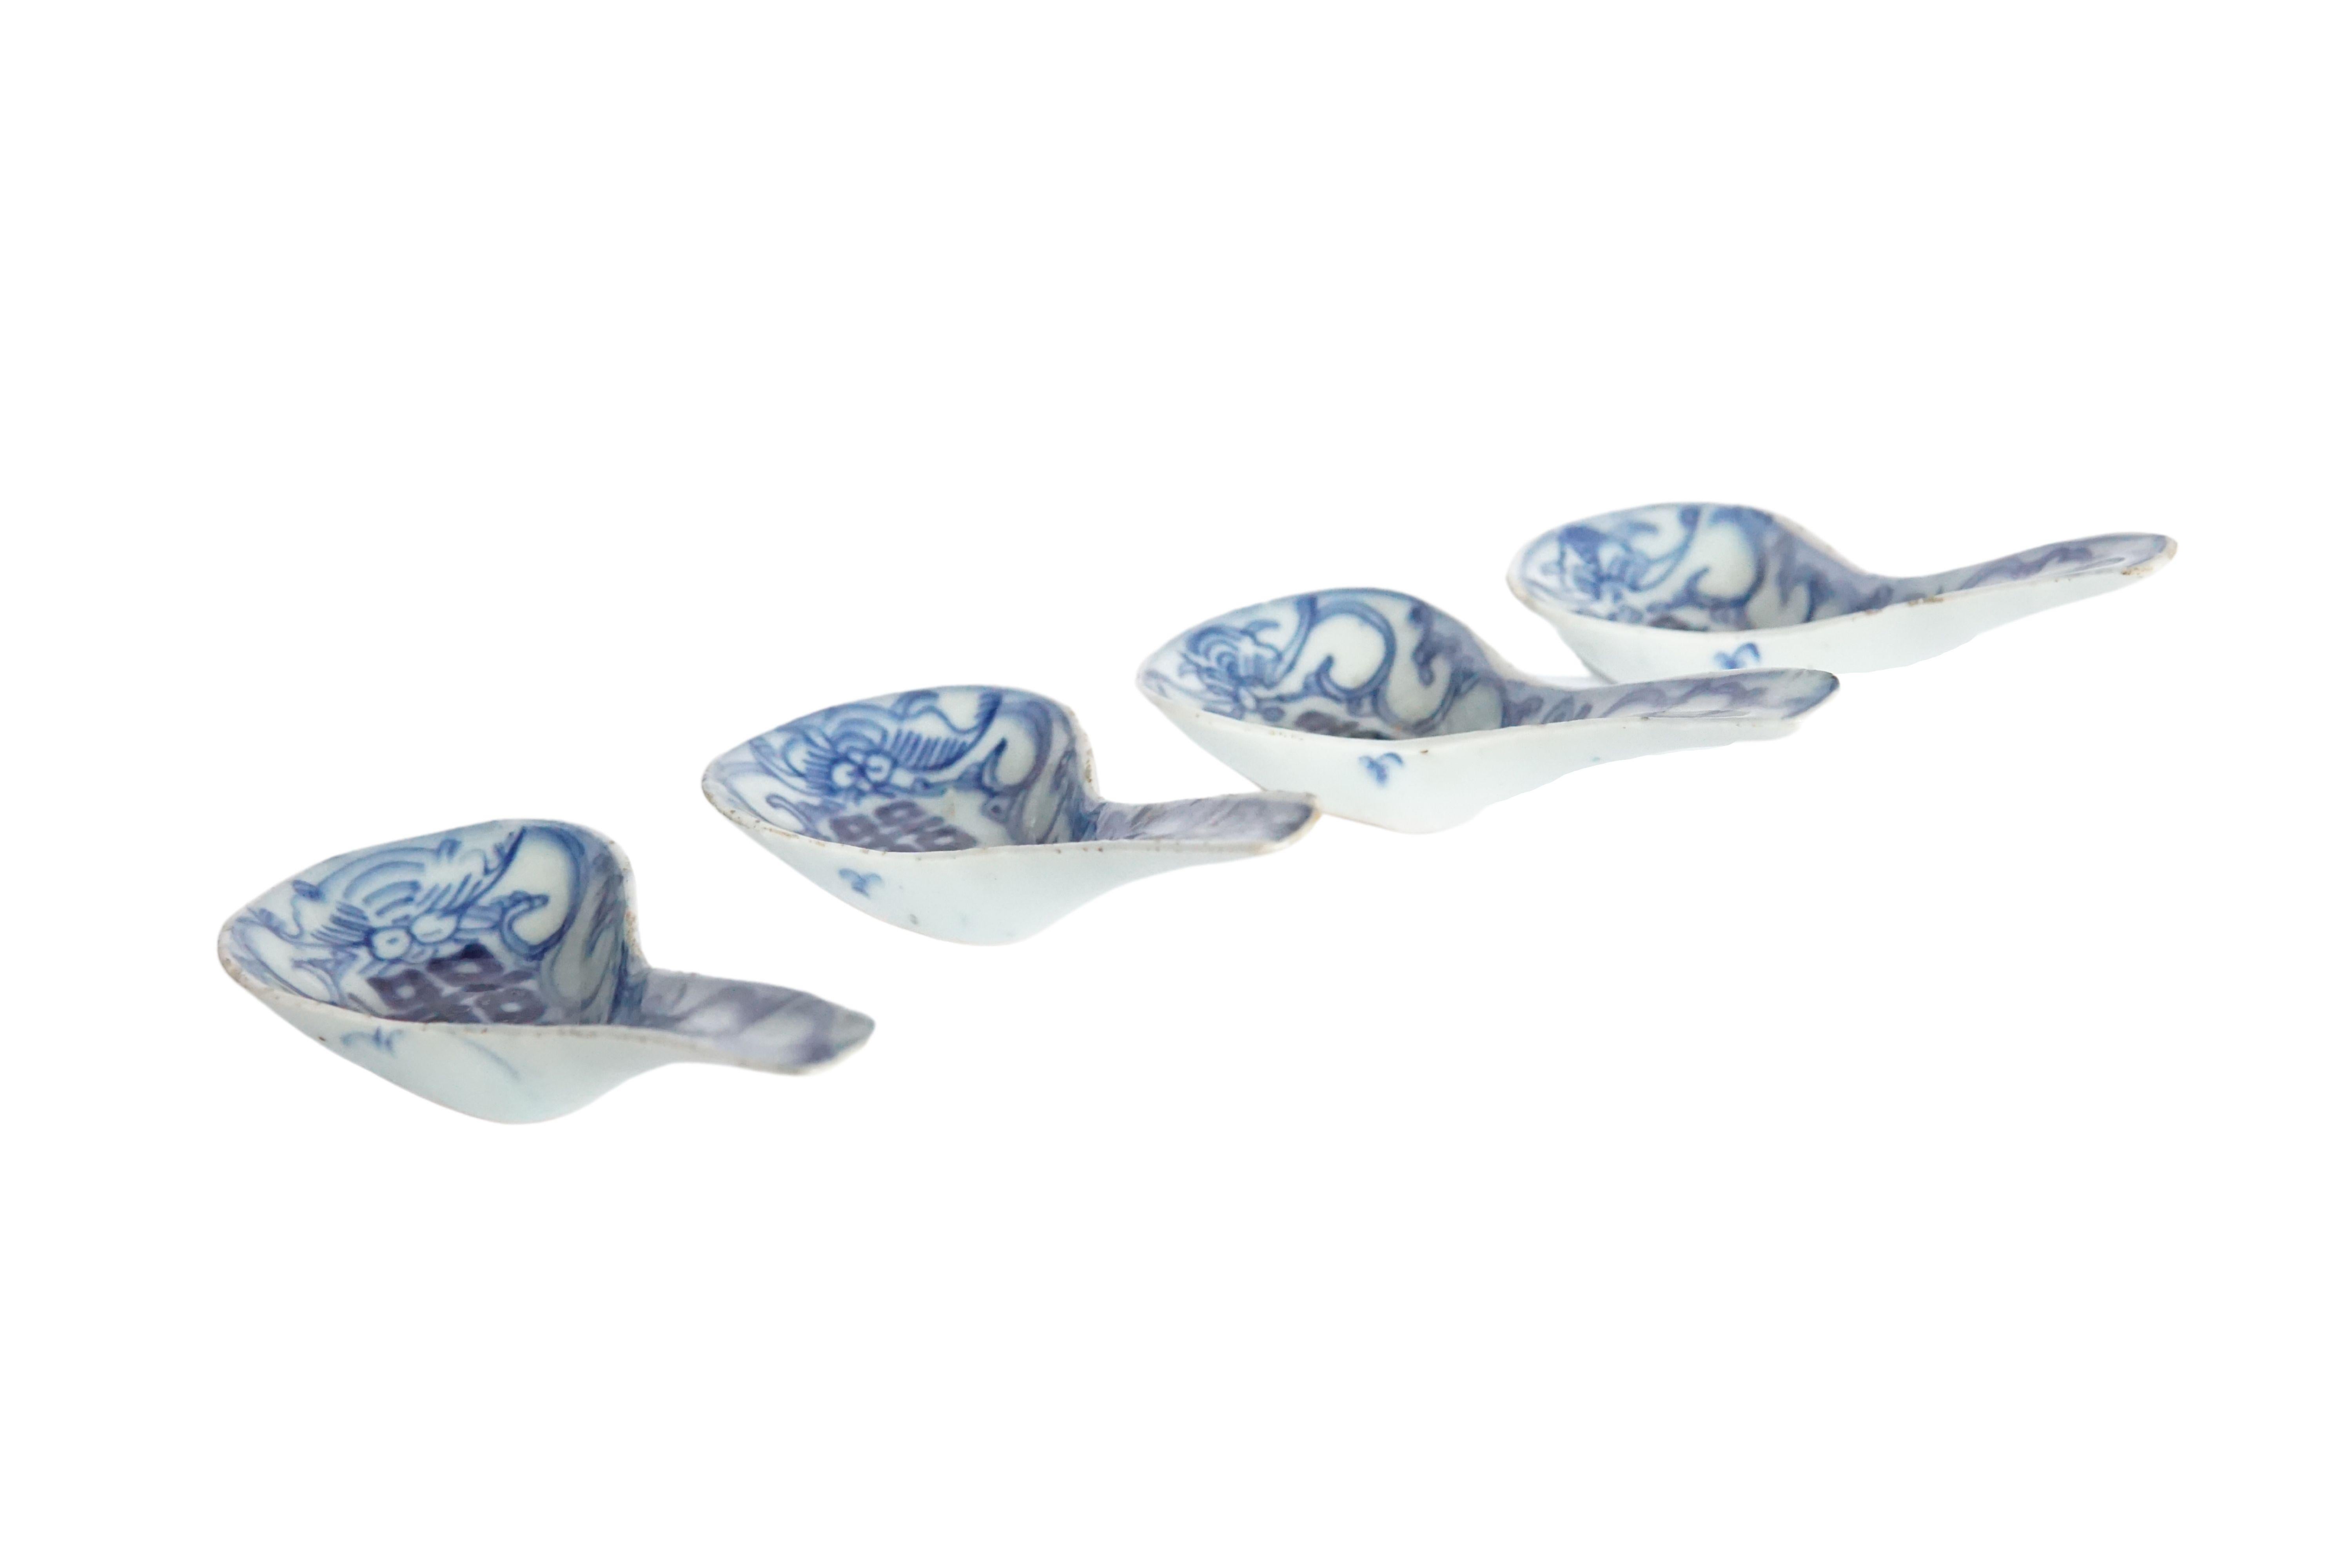 Glazed Set of 4 White & Blue Chinese Ceramic / Porcelain Spoons, Double Happiness For Sale